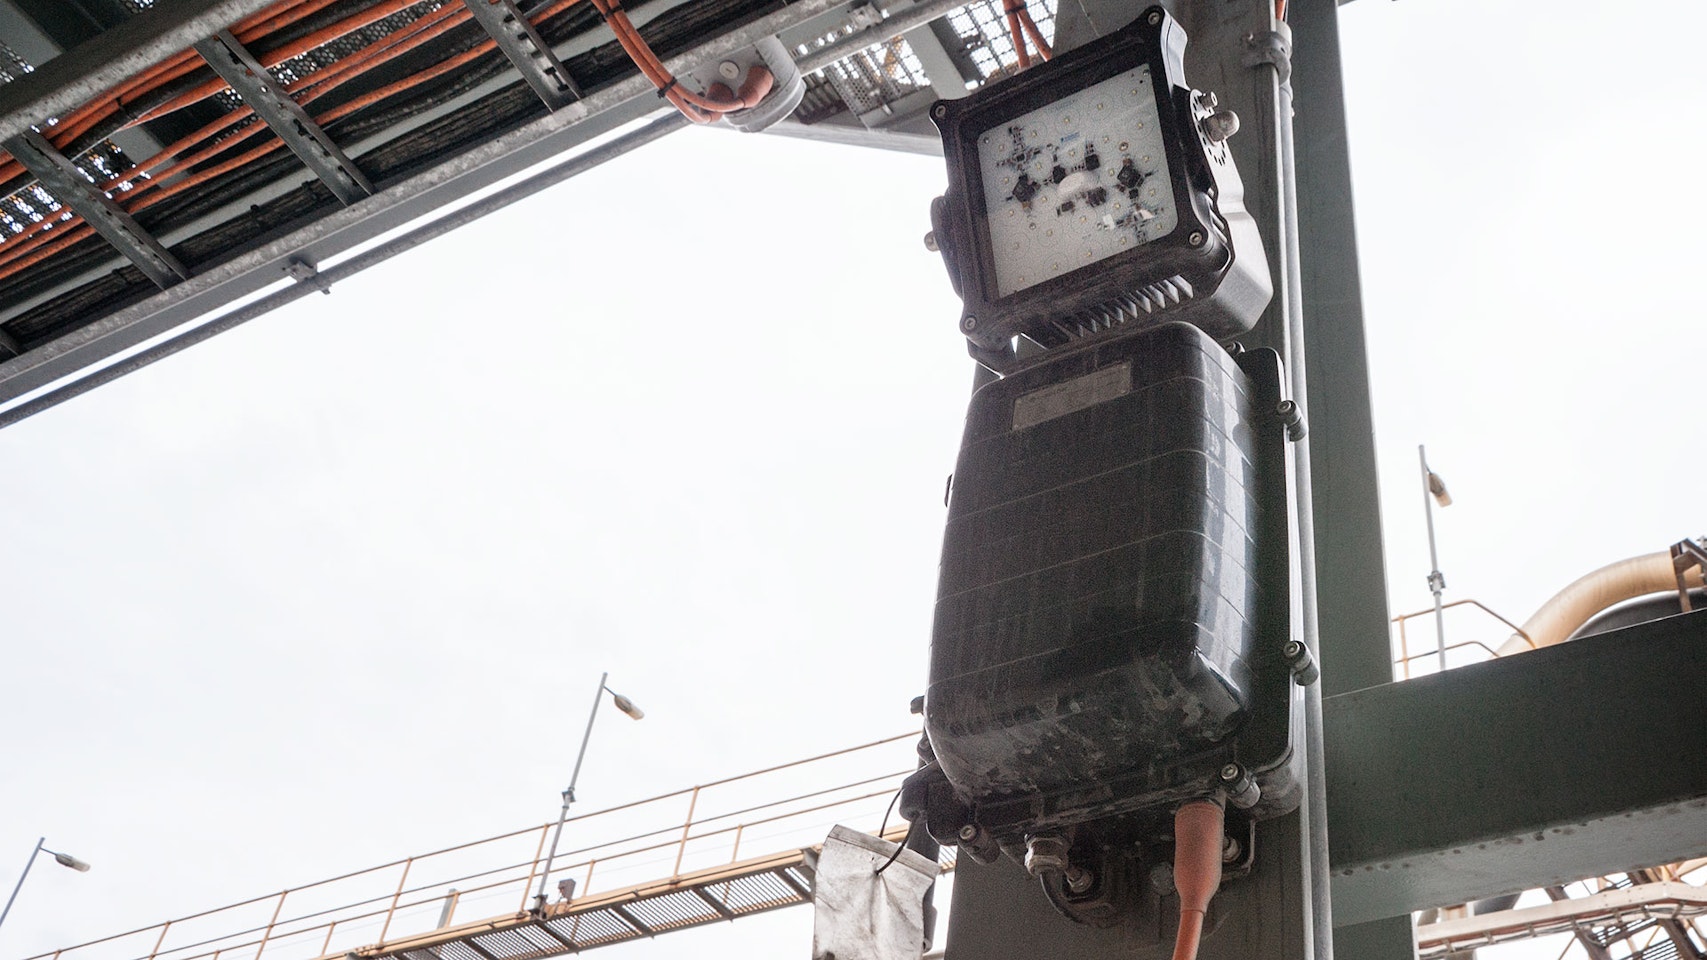 Warden LED Flood Light in application,installed on a wall on an industrial / mine site